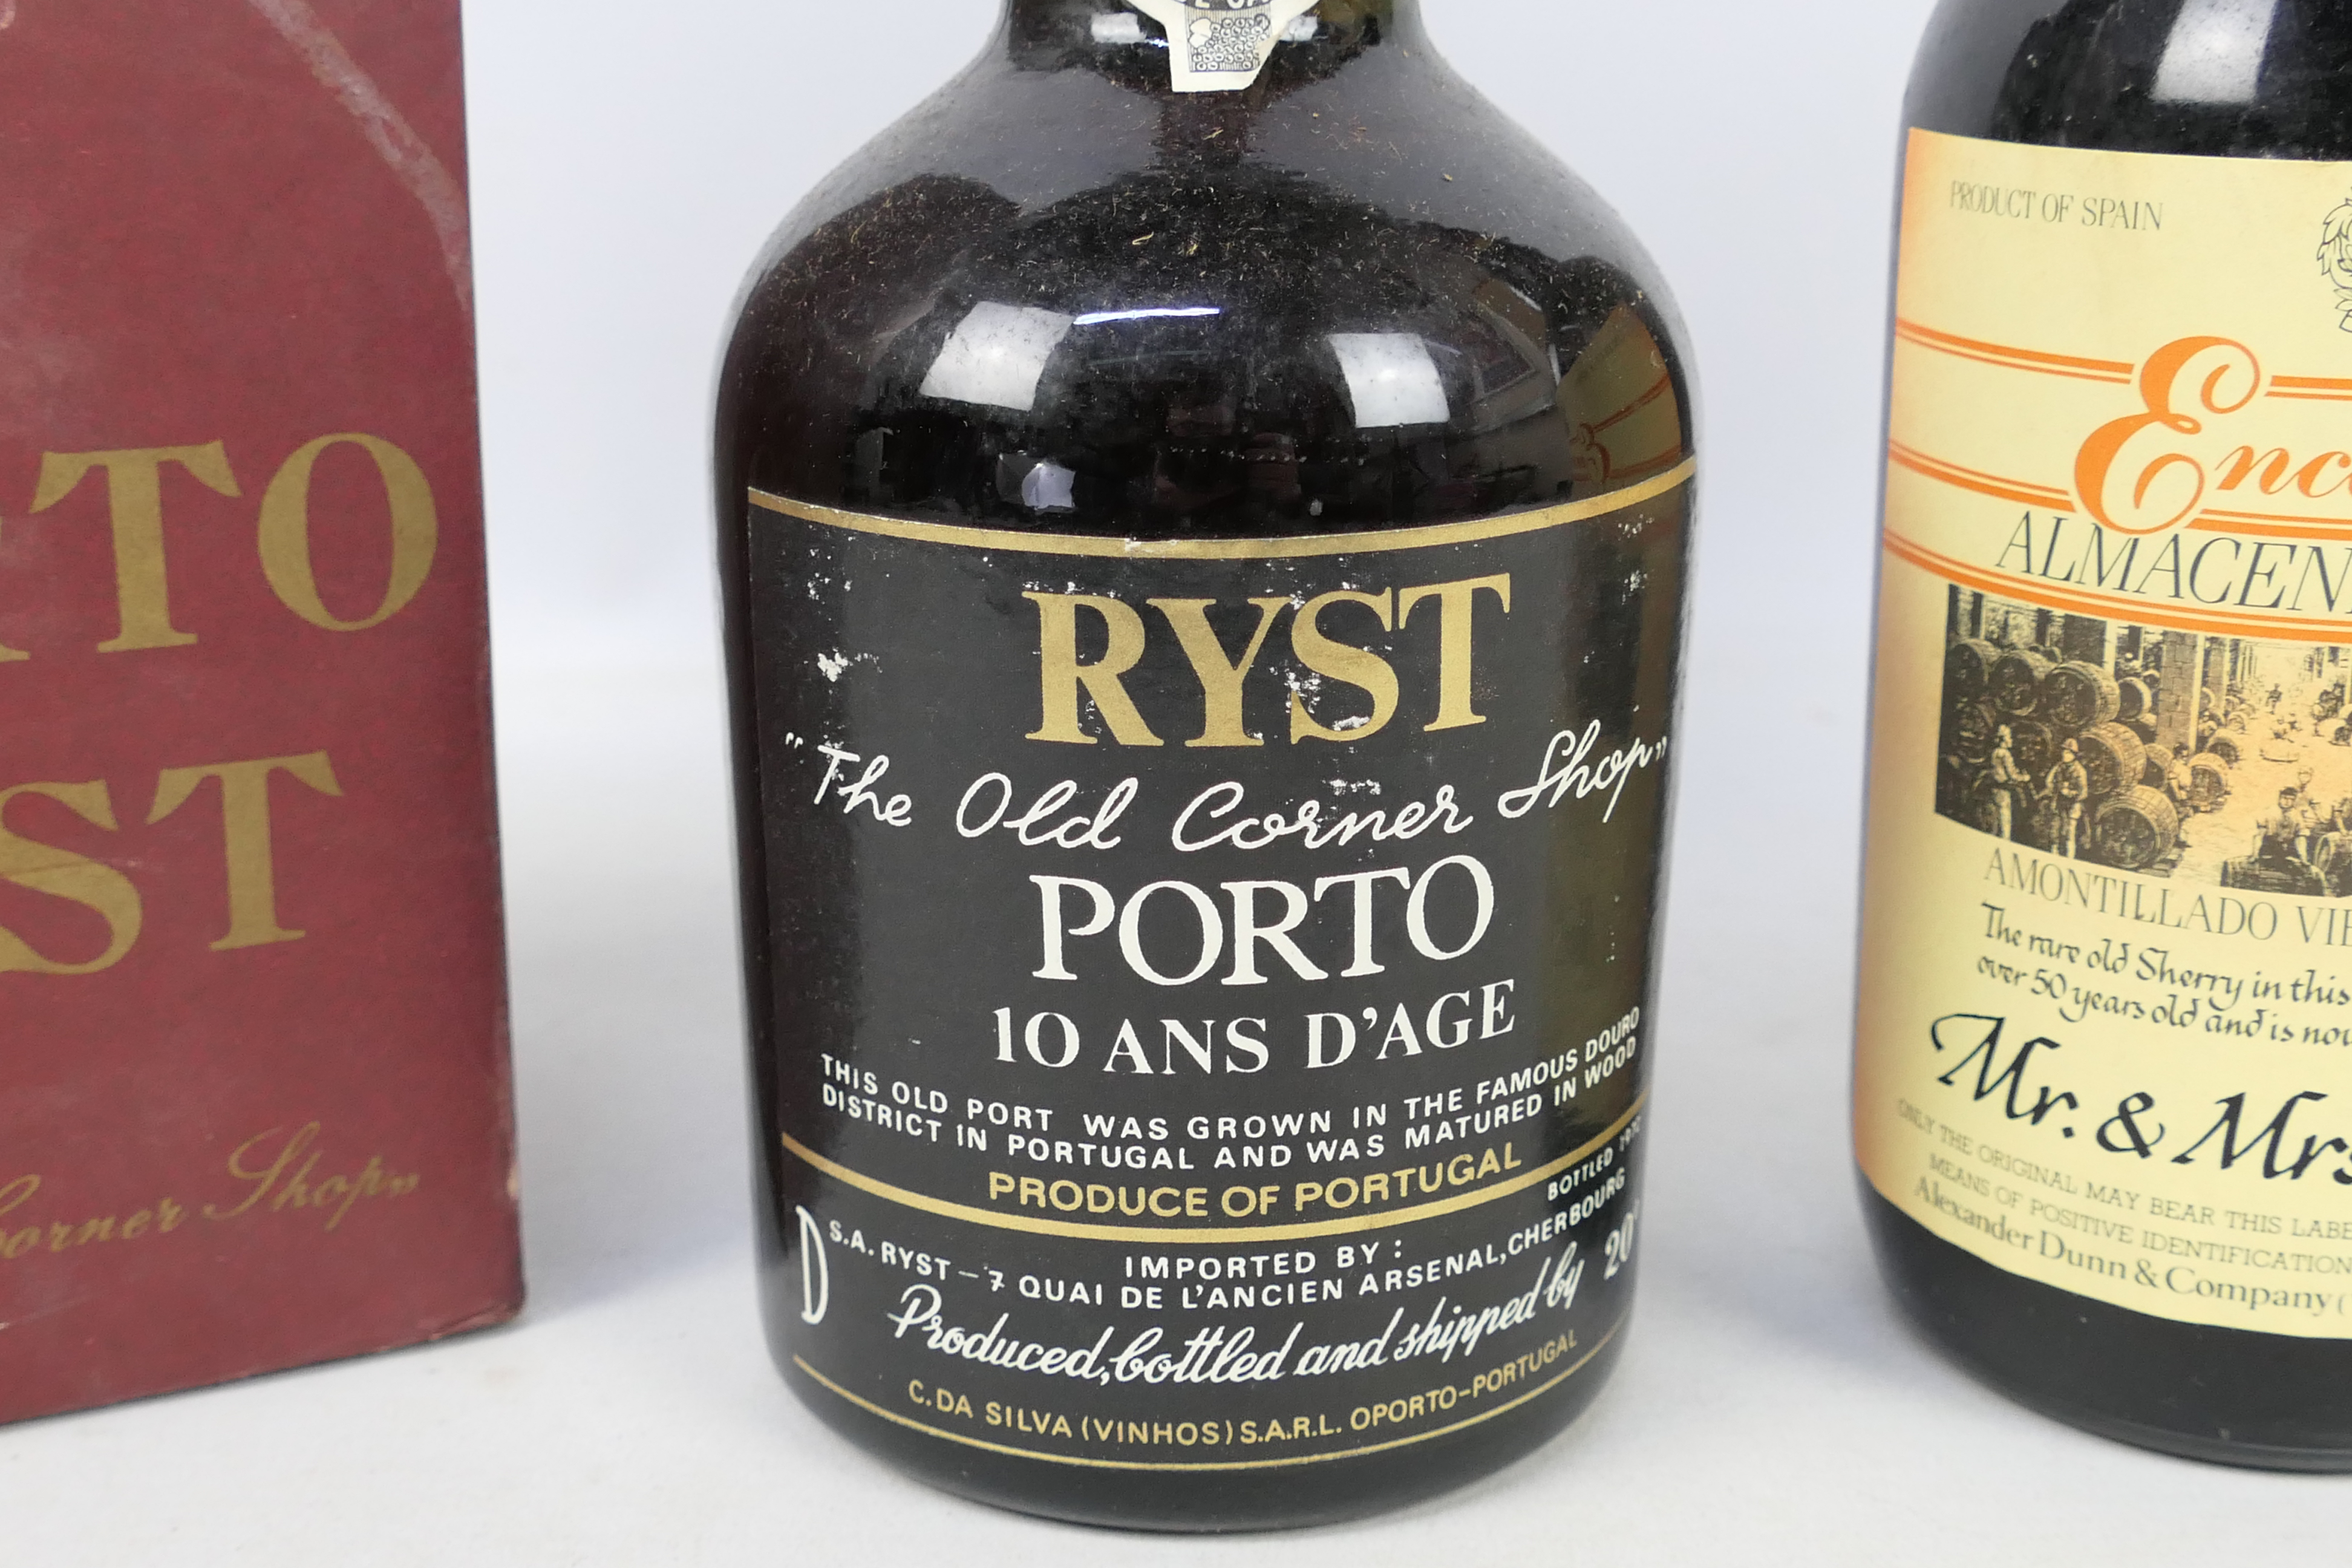 A bottle of Porto Ryst 10 Ans D'age, 20° - Image 2 of 6